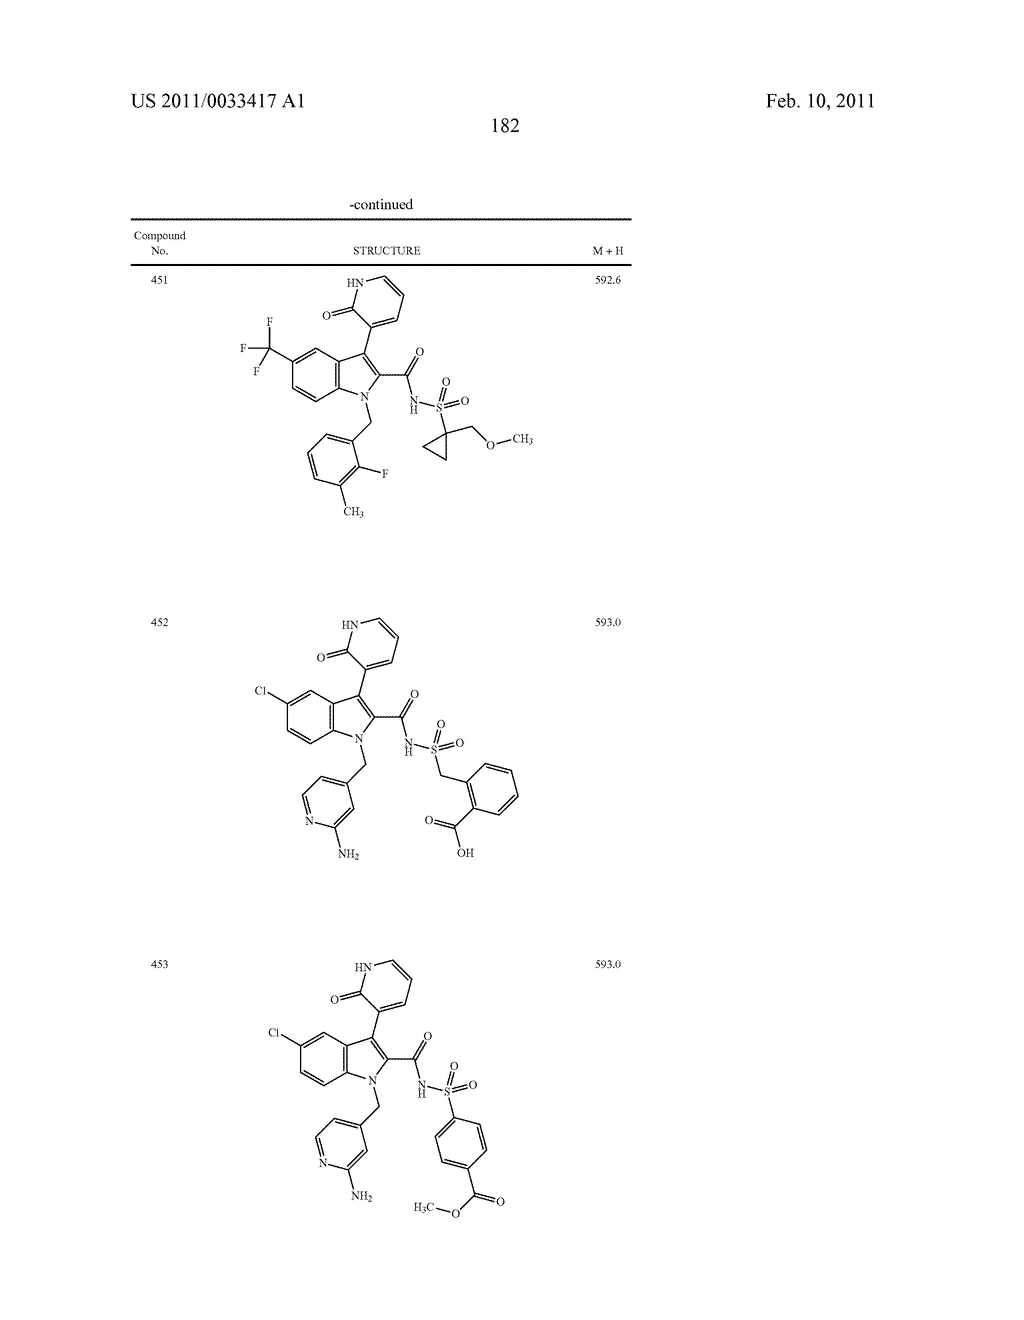 2,3-SUBSTITUTED INDOLE DERIVATIVES FOR TREATING VIRAL INFECTIONS - diagram, schematic, and image 183